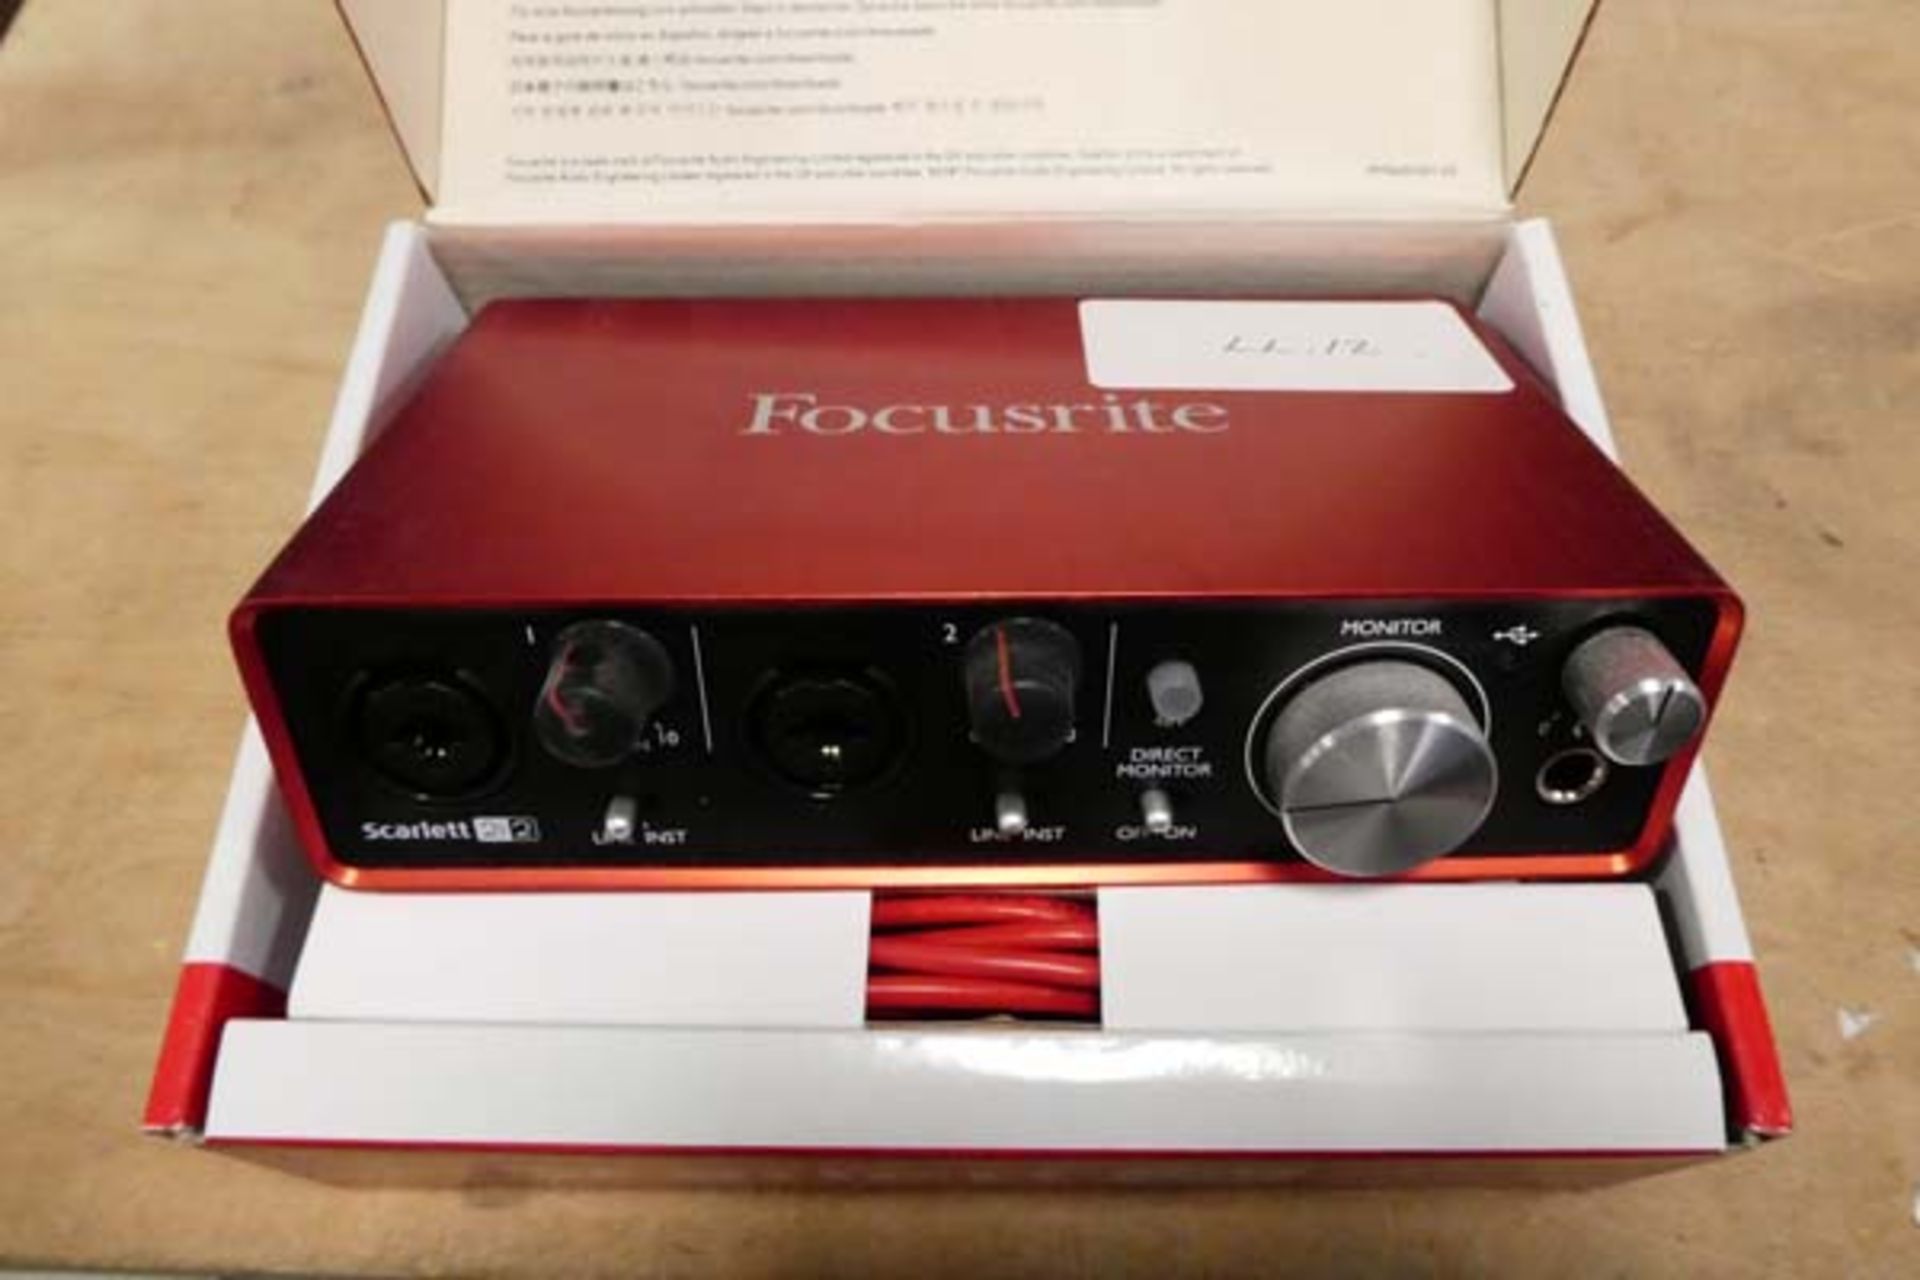 Scarlet 2i2 2nd gen. USB audio interface by Feusrite